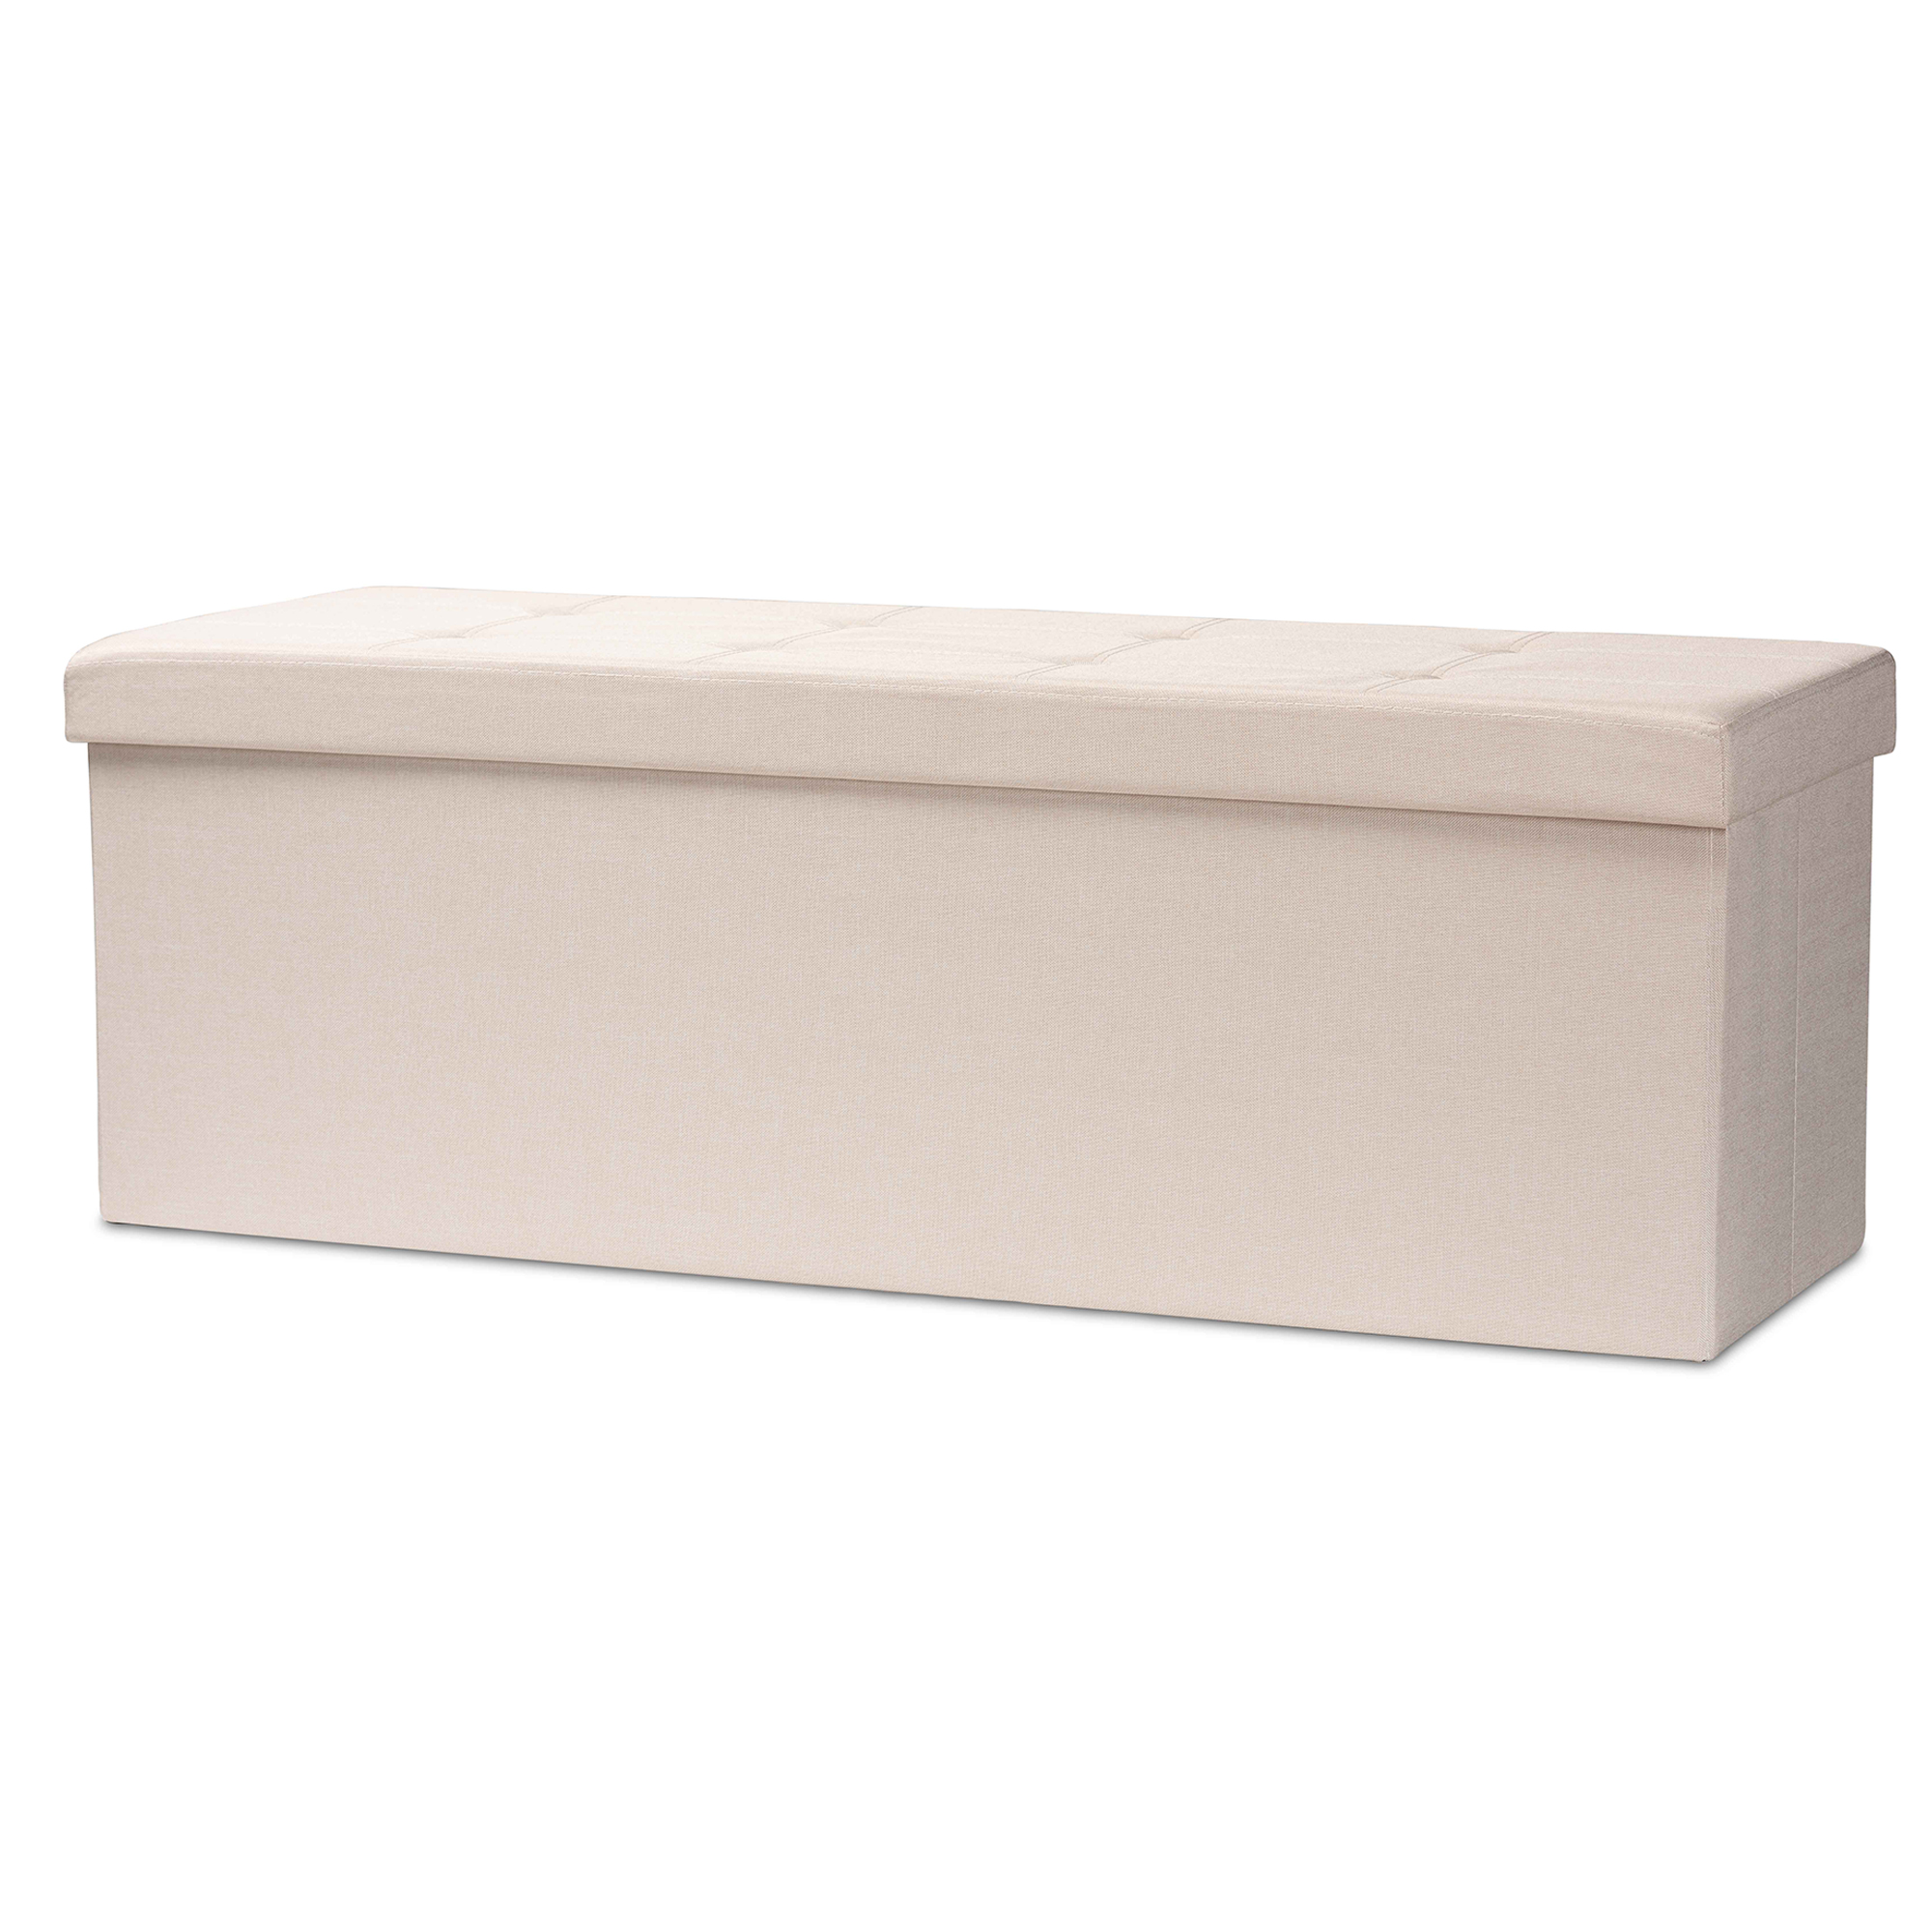 Baxton Studio Haide Modern and Contemporary Beige Fabric Upholstered Storage Ottoman